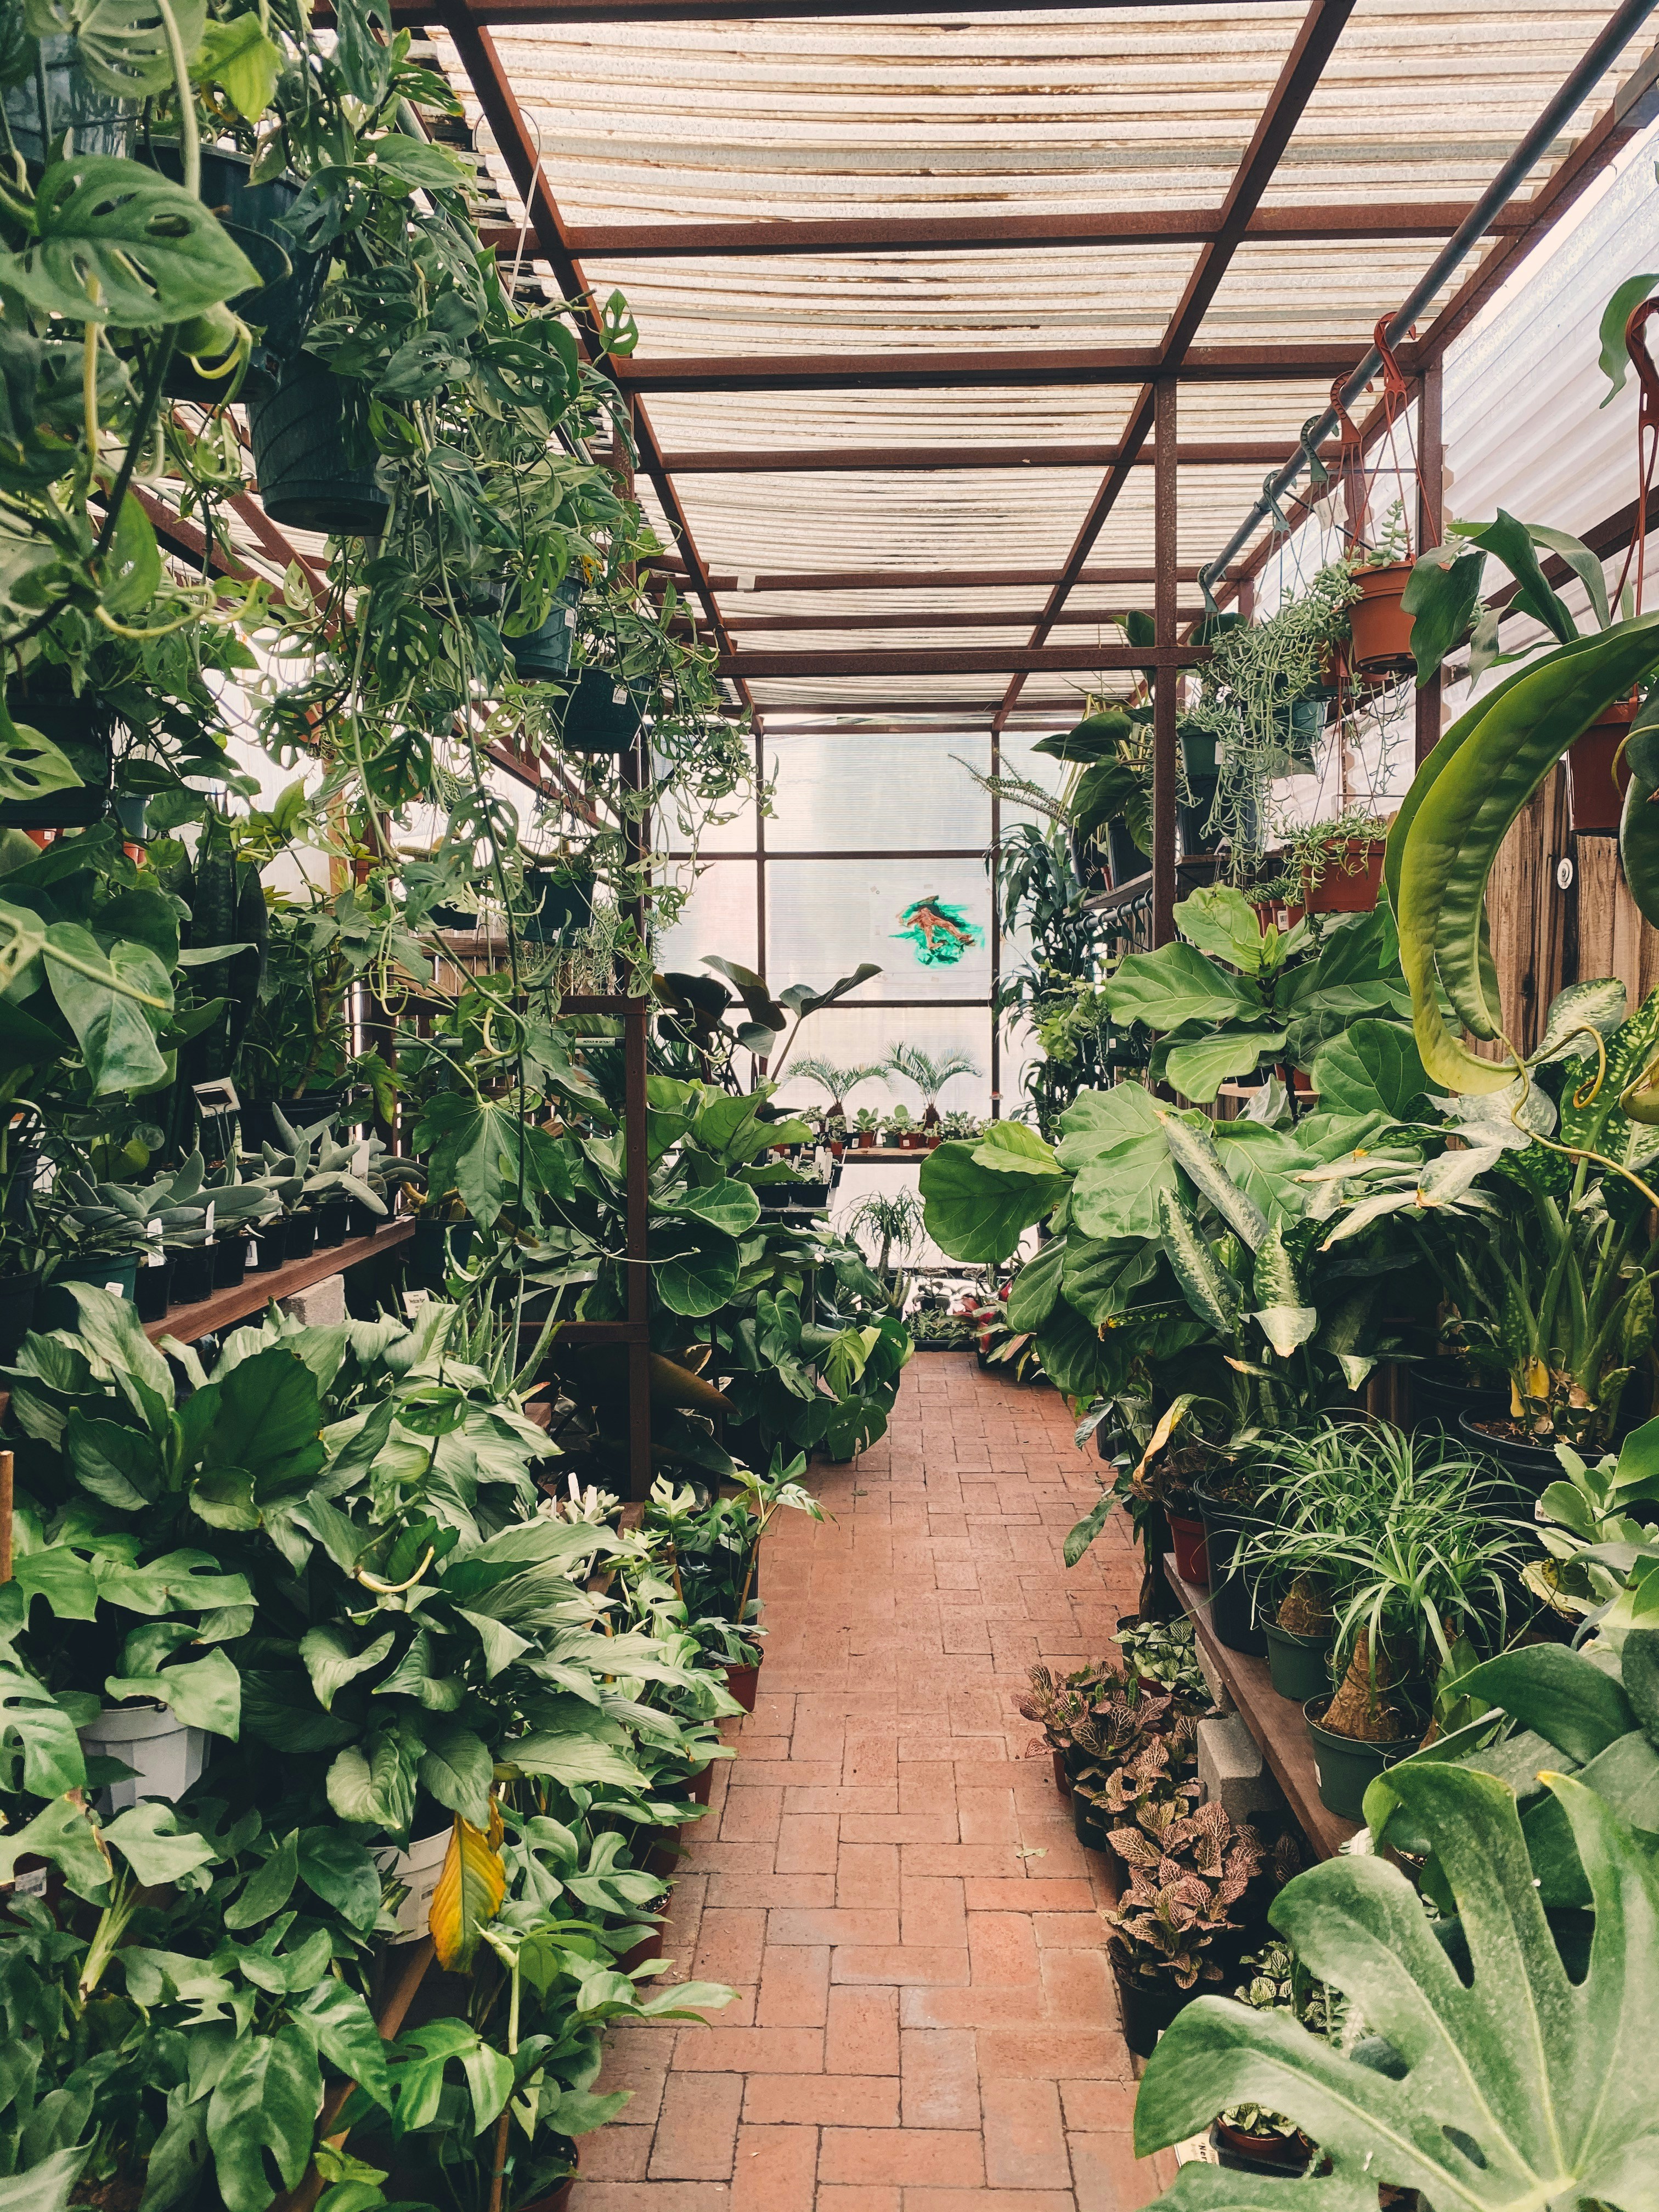 999+ plant nursery pictures | download free images on unsplash